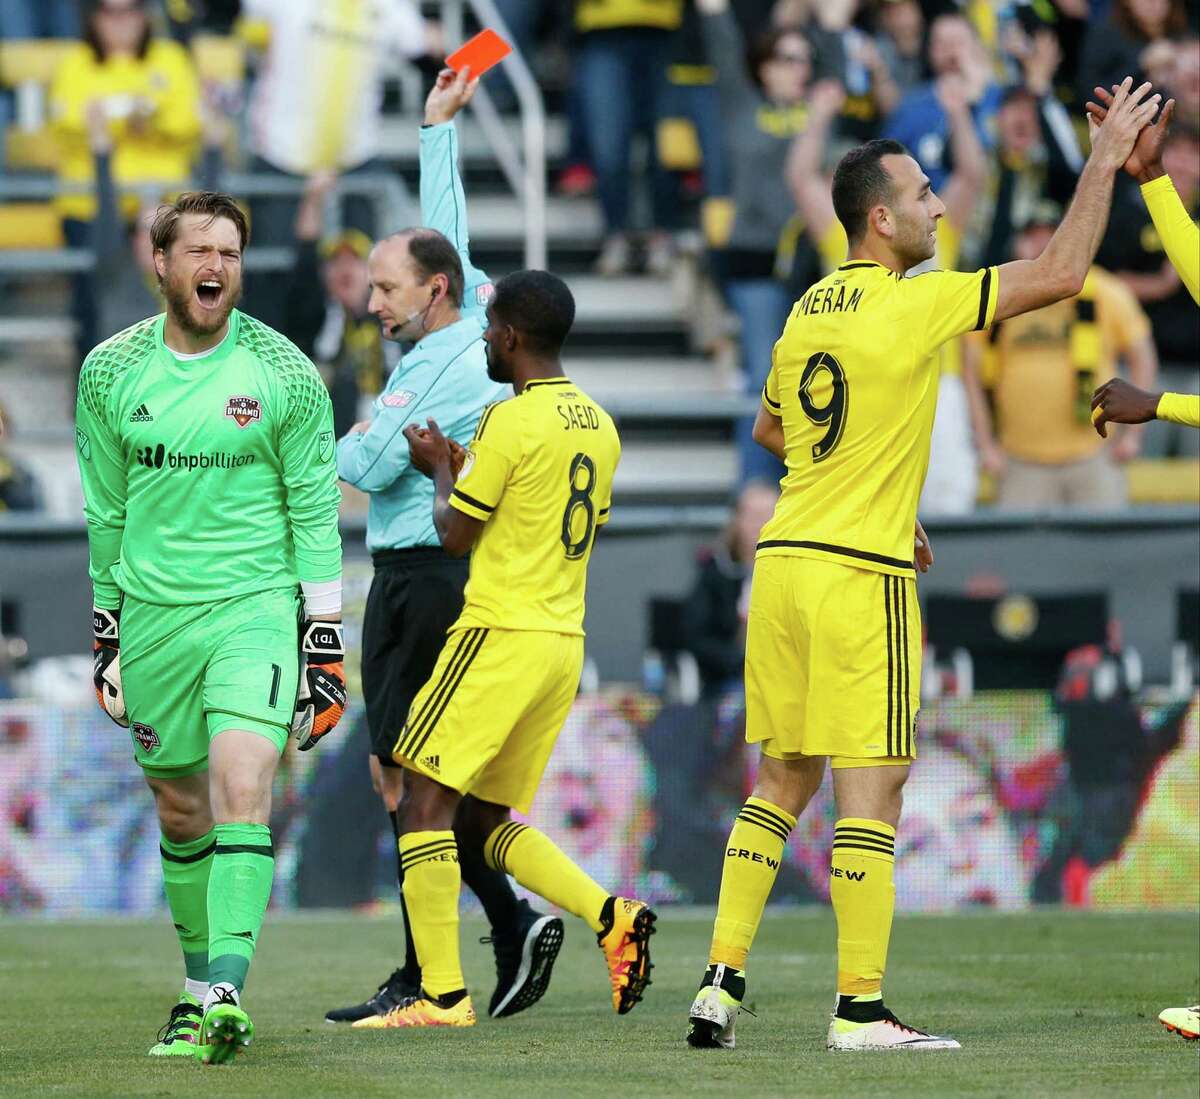 Houston Dynamo goalkeeper Tyler Deric (1) reacts after receiving a red card for an infraction against the Columbus Crew at Mapfre Stadium in Columbus, Ohio, on Saturday, April 23, 2016. (Barbara J. Perenic/Columbus Dispatch/TNS)